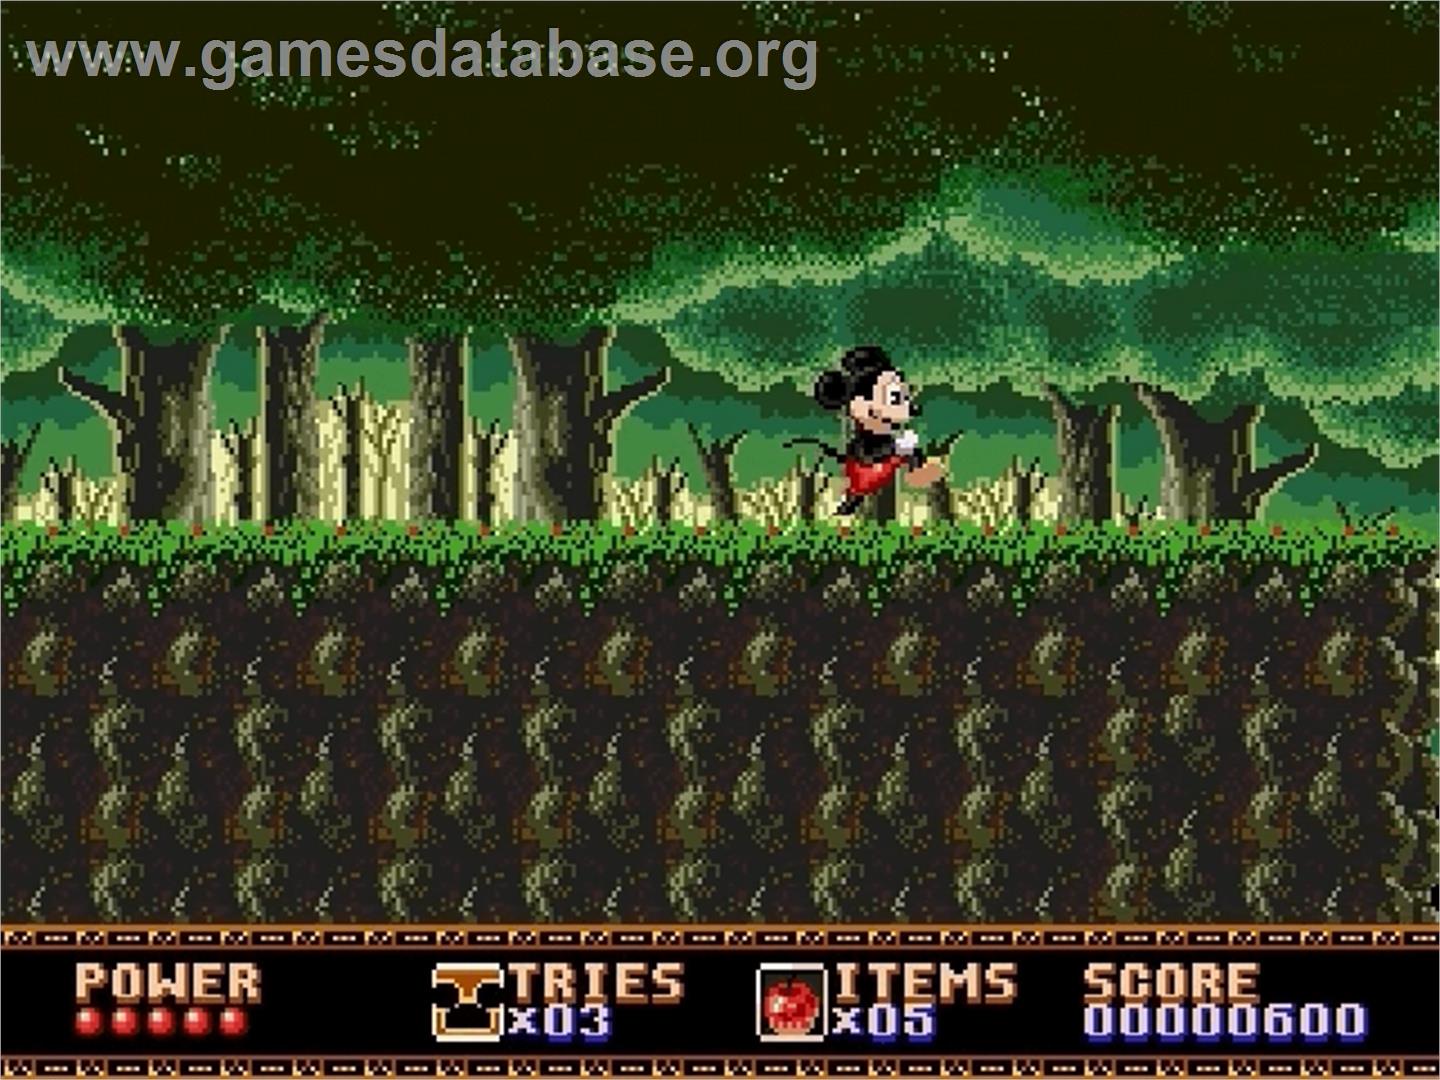 Castle of Illusion starring Mickey Mouse - Sega Genesis - Artwork - In Game